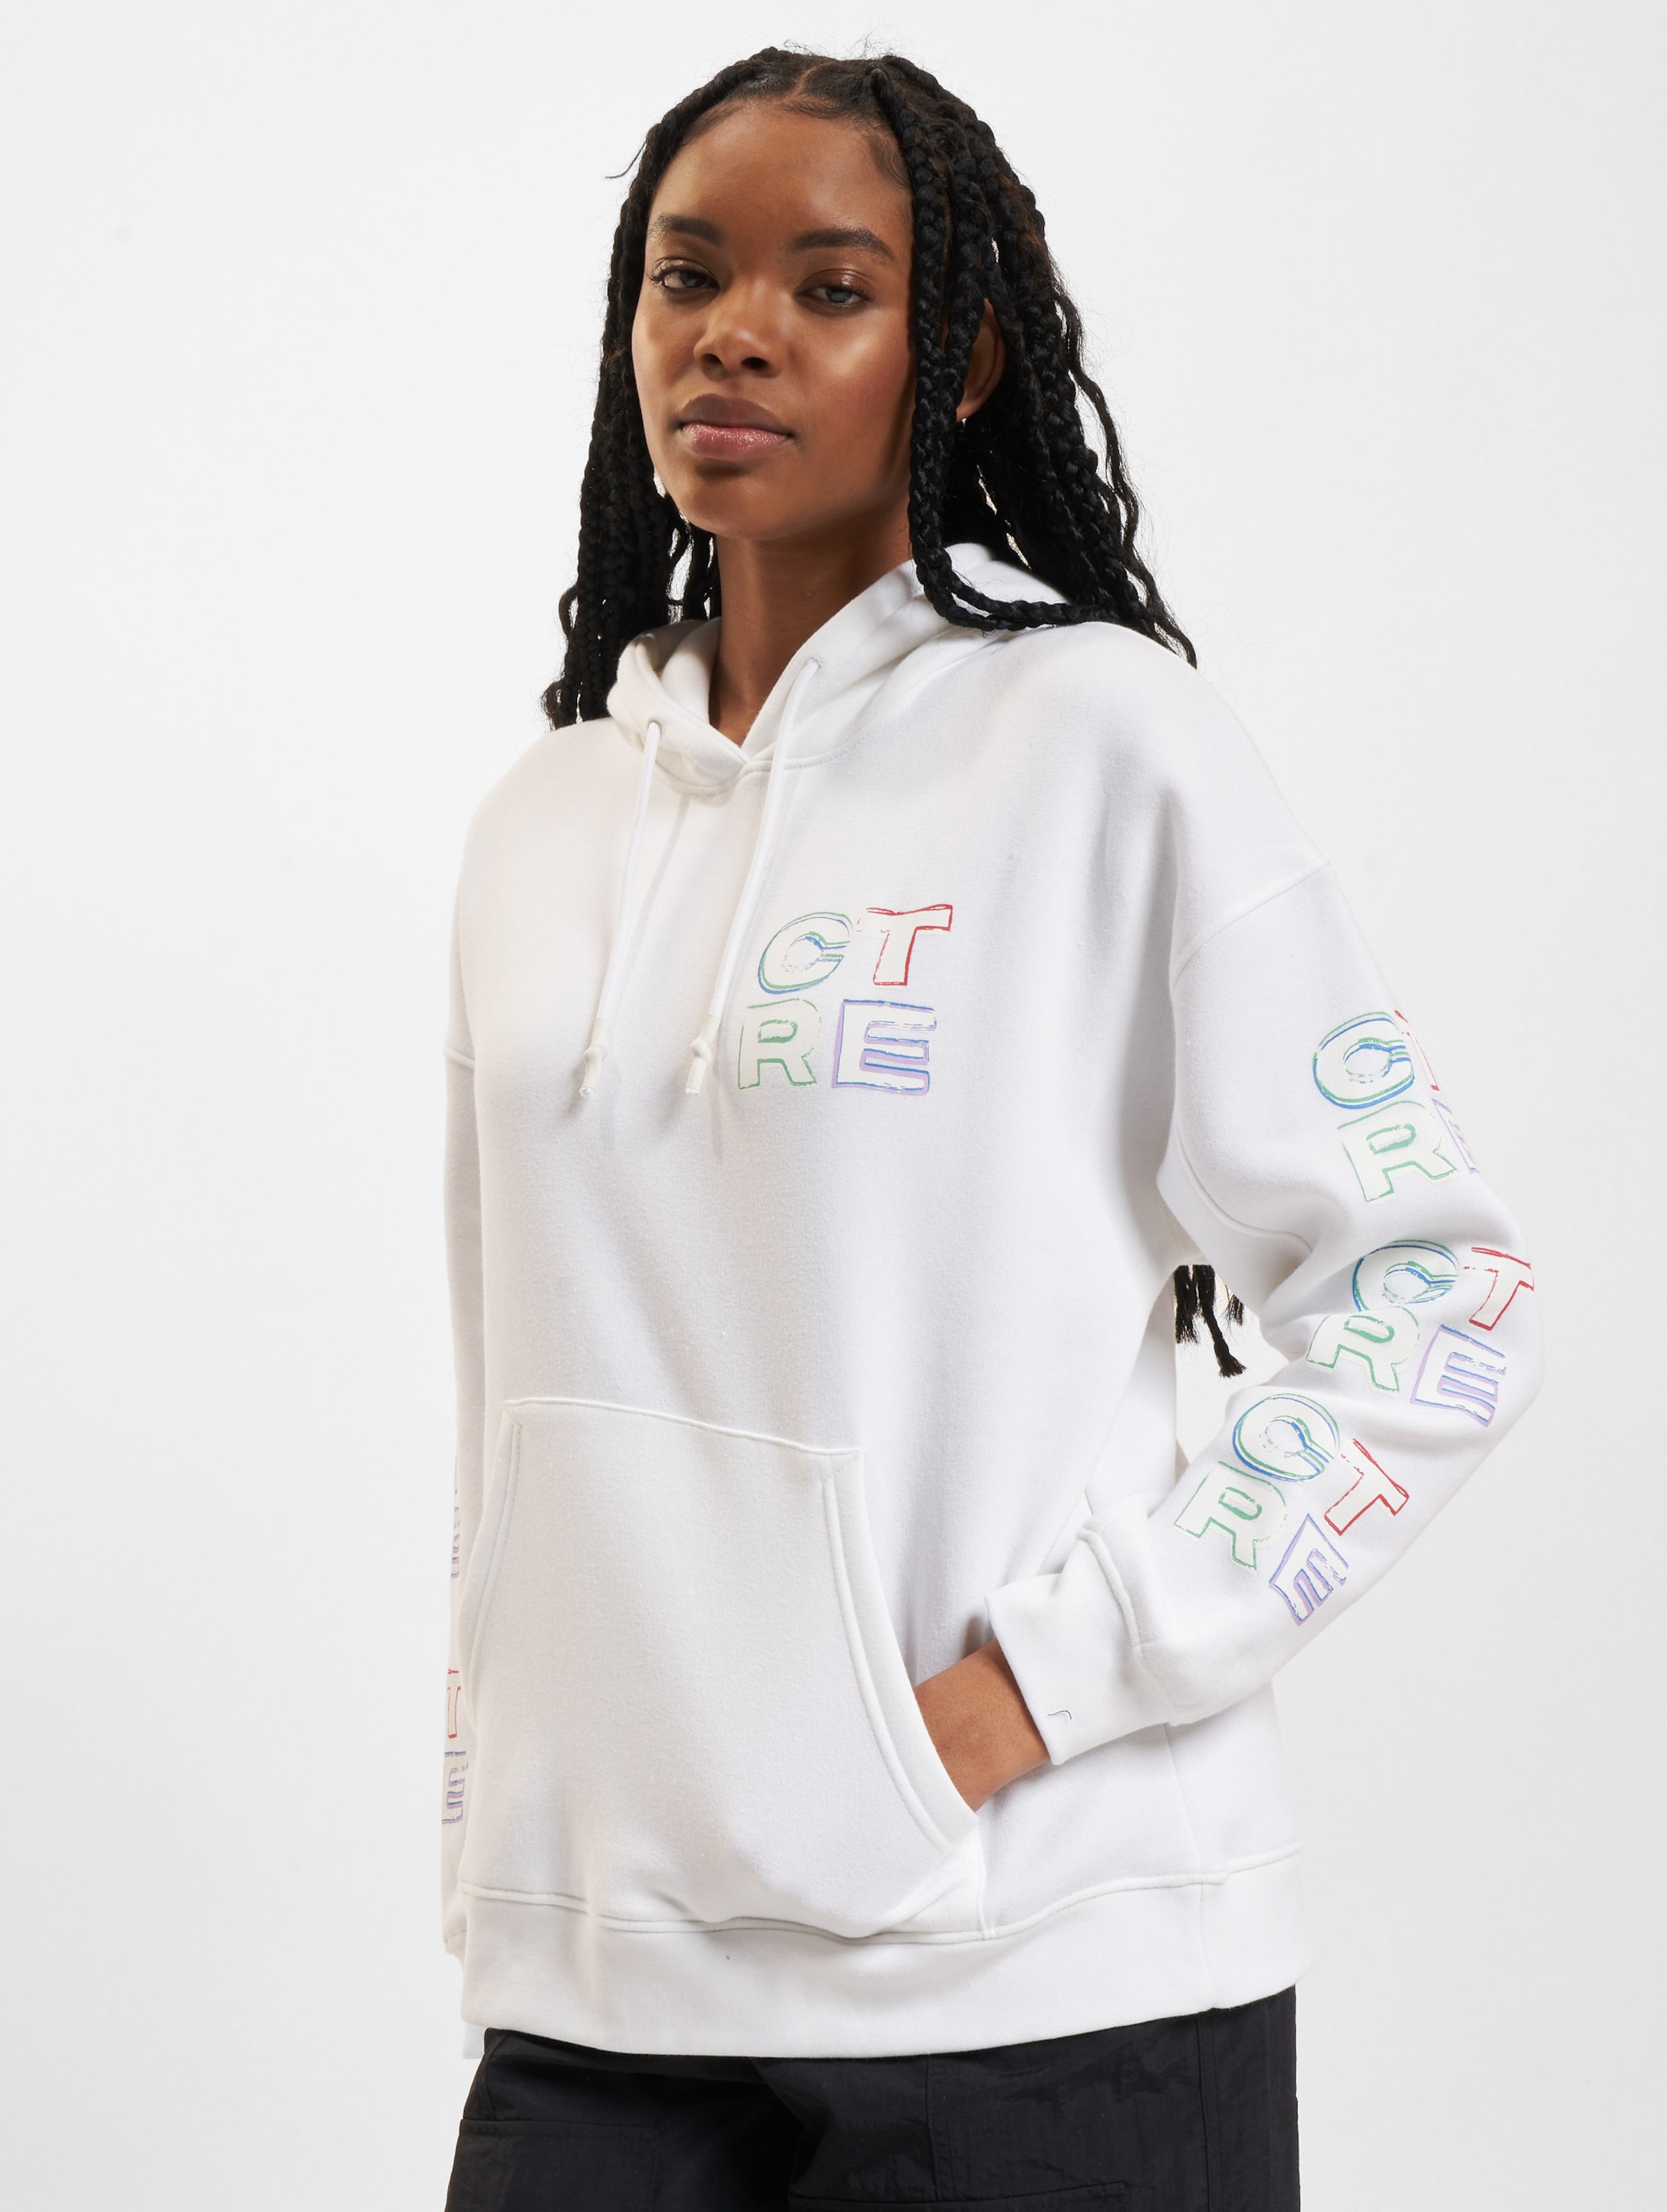 The Couture Club Multi Coloured Graphic Oversized Hoodie Vrouwen op kleur wit, Maat S